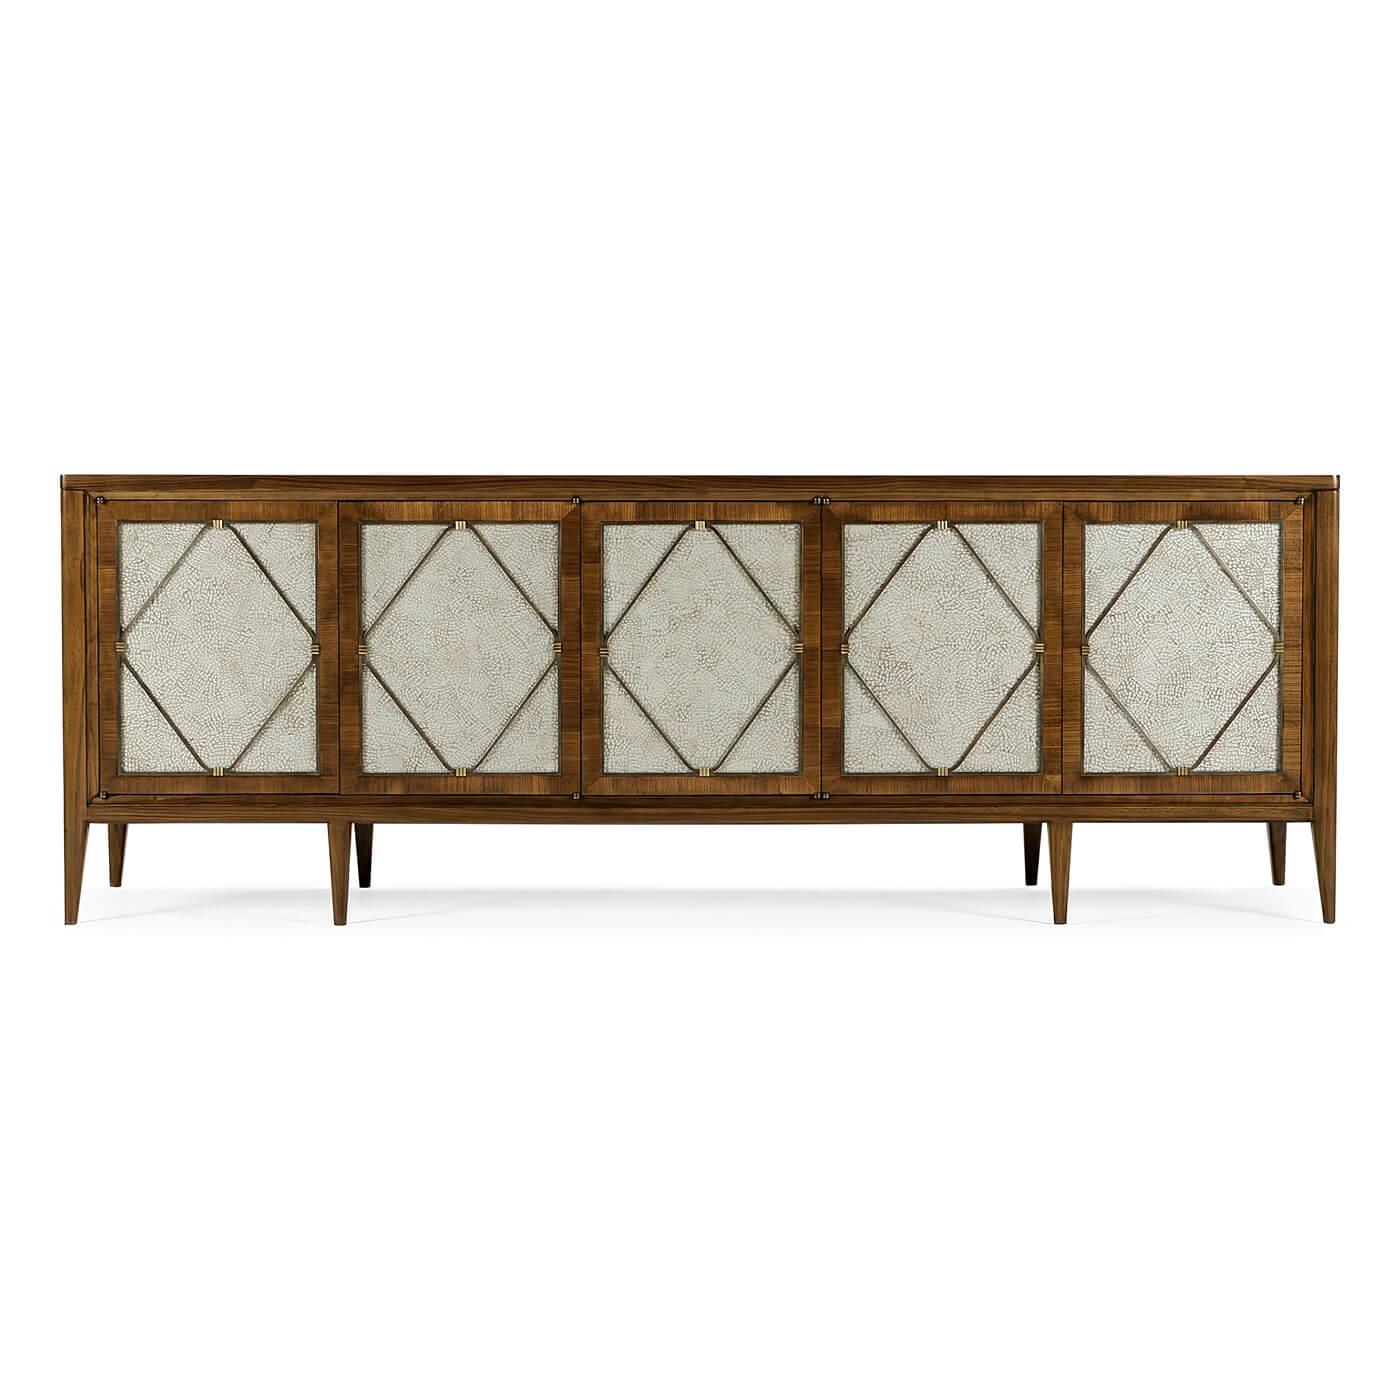 A Long Mid-Century Modern style media cabinet. This cabinet is constructed of American walnut with a transparent, lacquer finish. The five doors feature duck eggshell inlay panels and the interior fitted with long shelves. The hardware is cast from